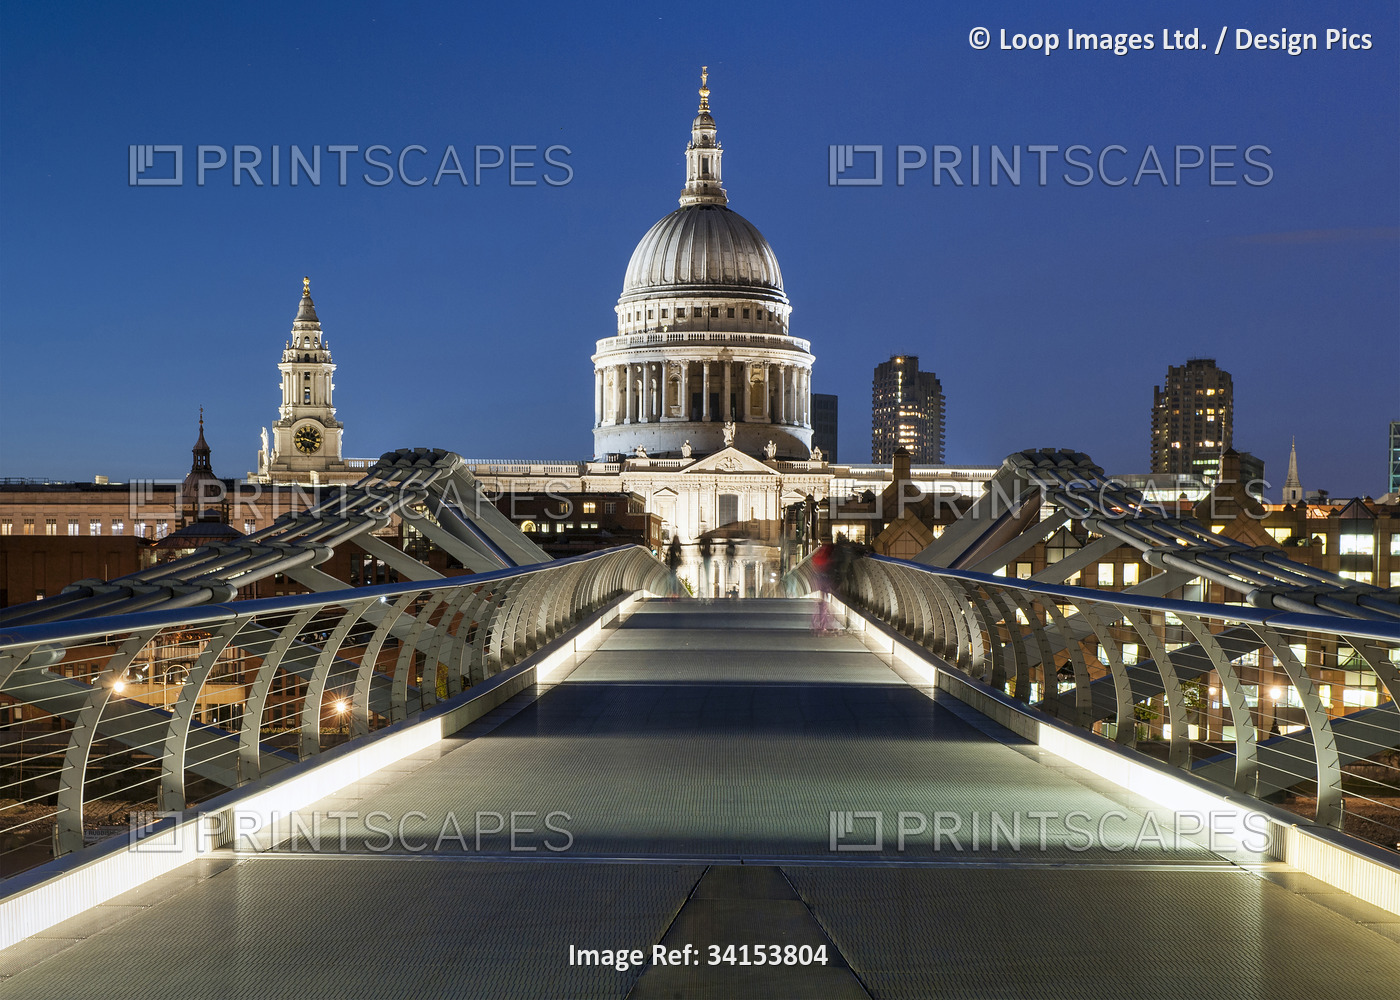 London's Millennium Bridge leading to St Pauls Cathedral at night.